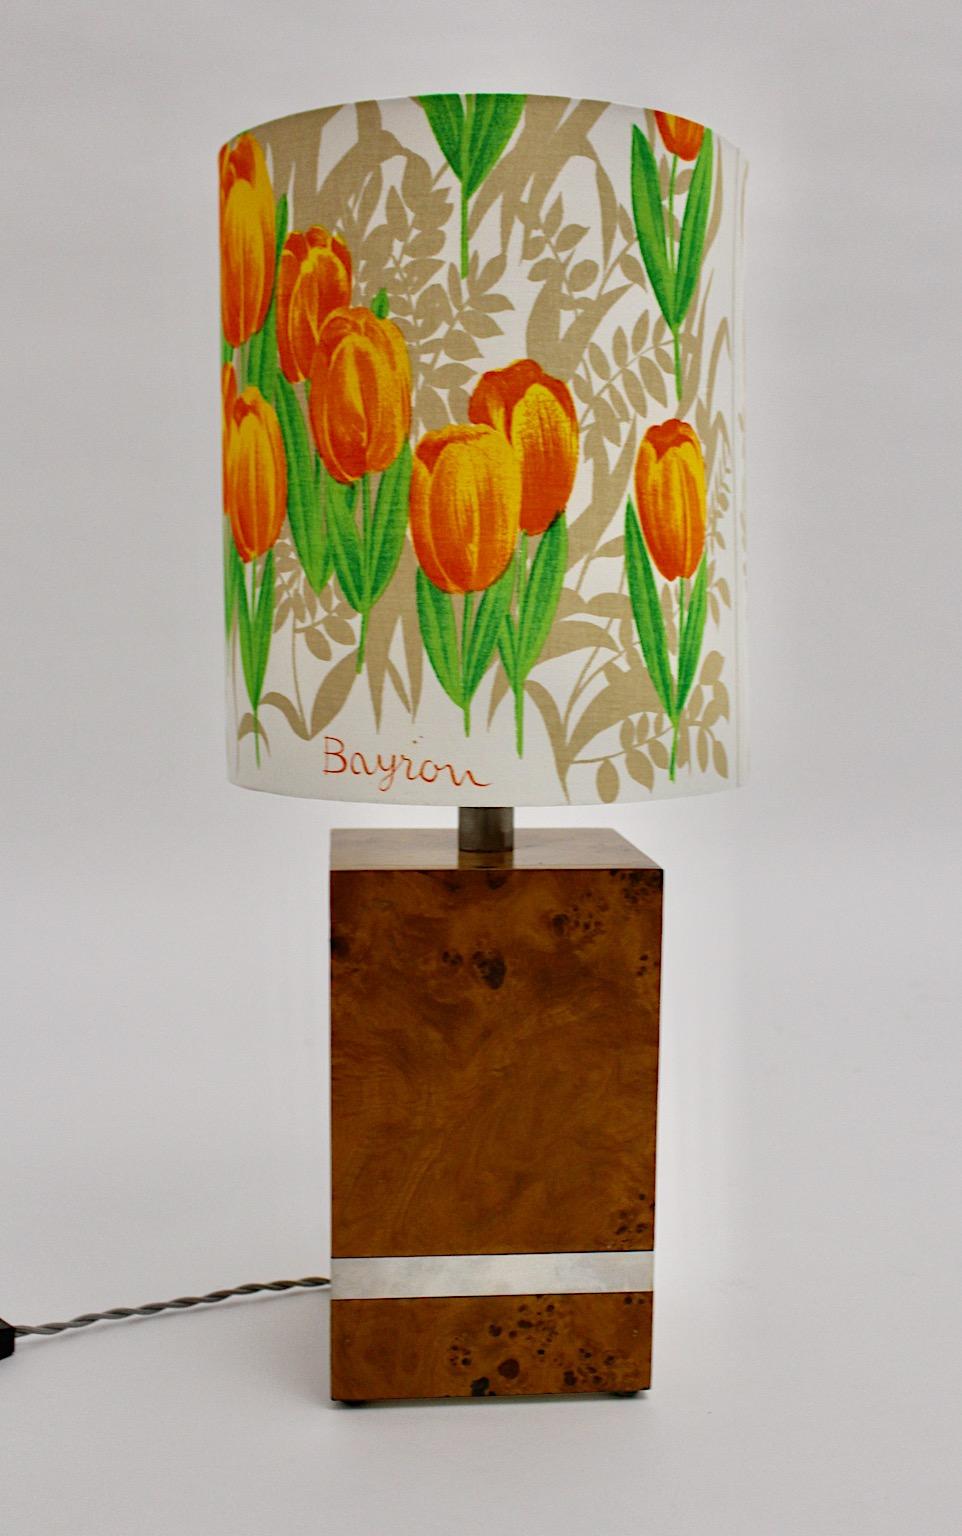 Hollywood Regency Style vintage table lamp from poplar wood veneer and chrome details at the rectangular base.
The recently hand made lamp shade from delicate batiste fabric shows flowers in vivid colors like orange and green.
While the lamp shade